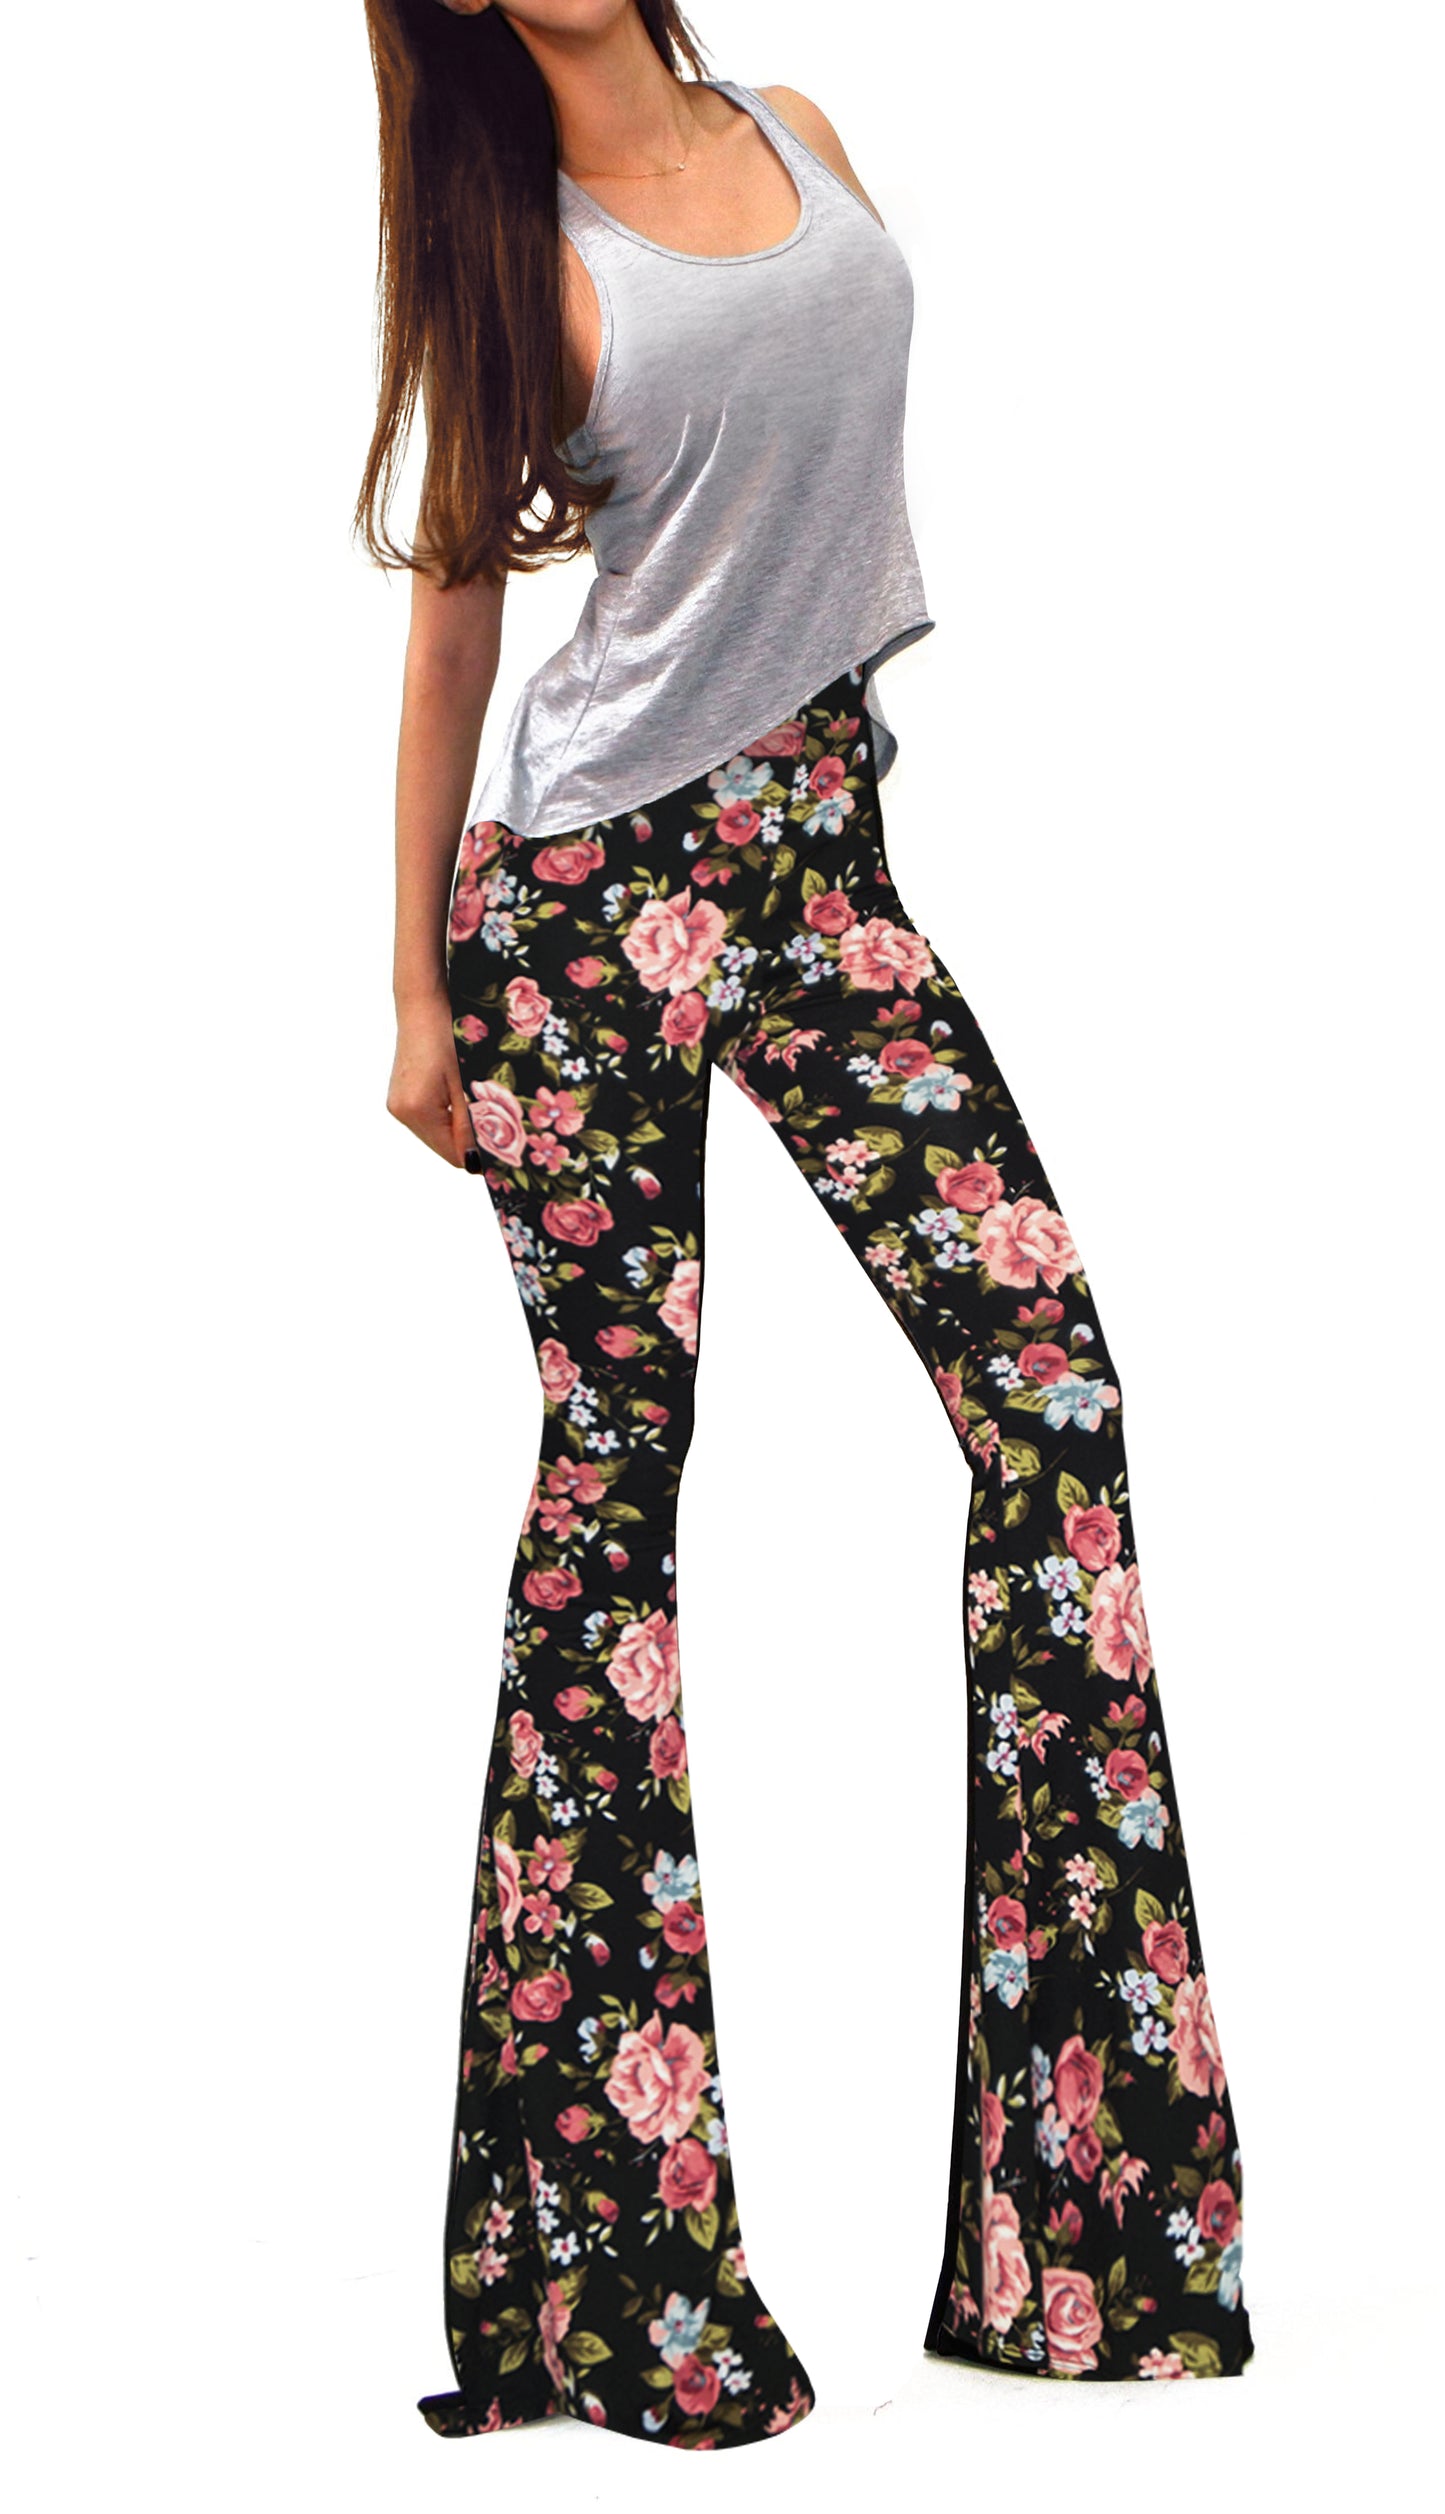 Women's Fold Over Waist Floral Print Flared Pants